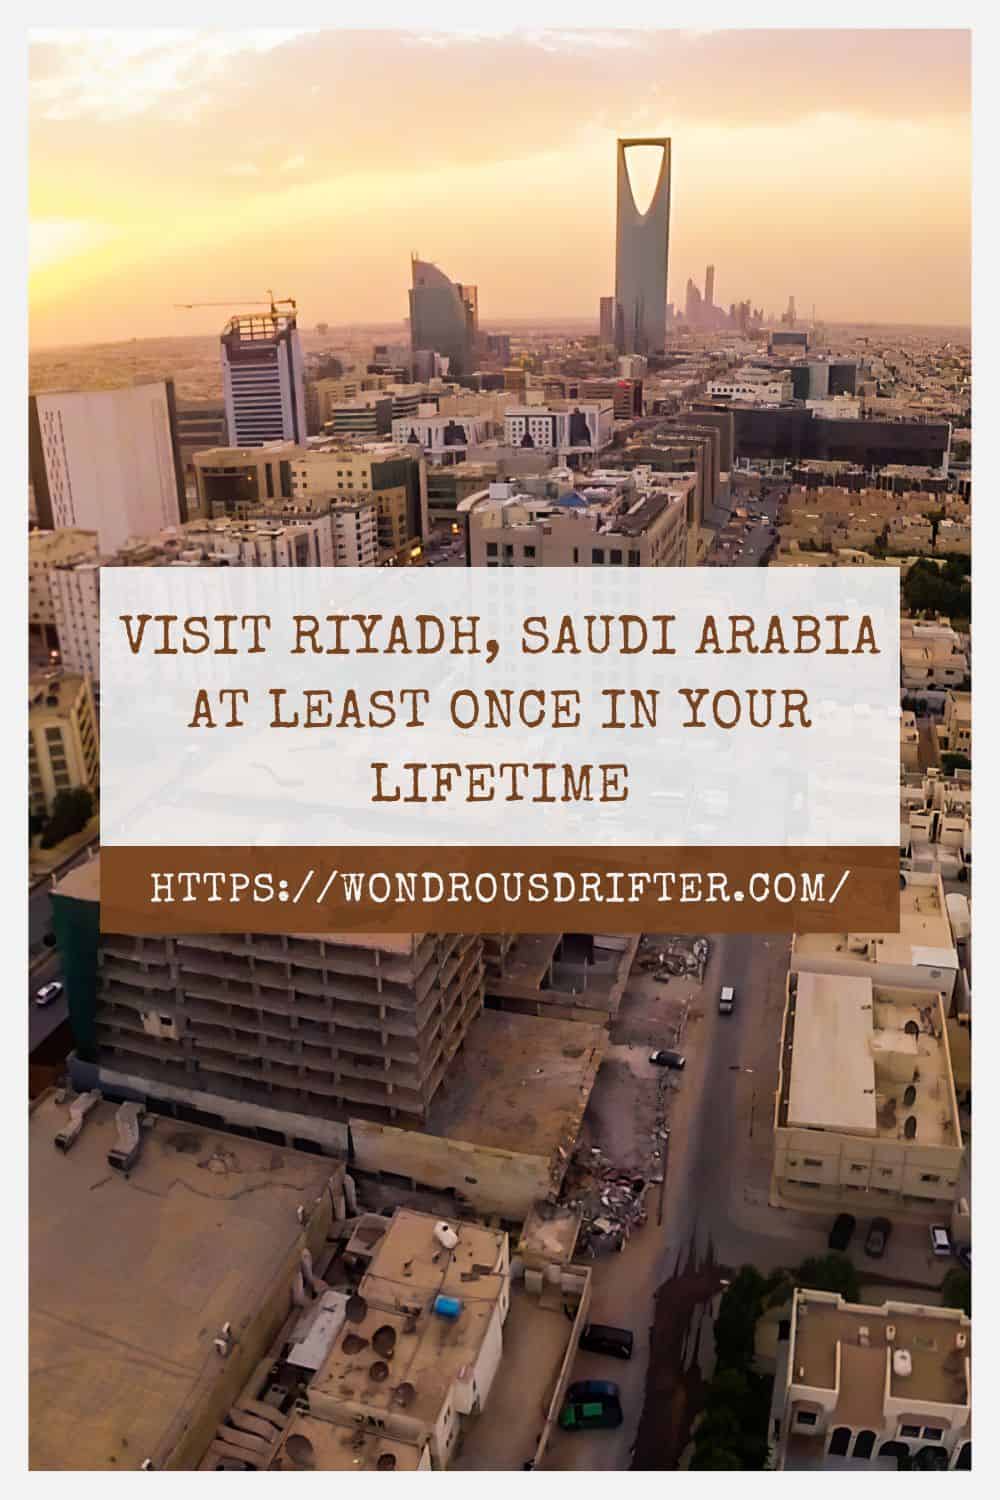 Visit Riyadh Saudi Arabia at least once in your lifetime